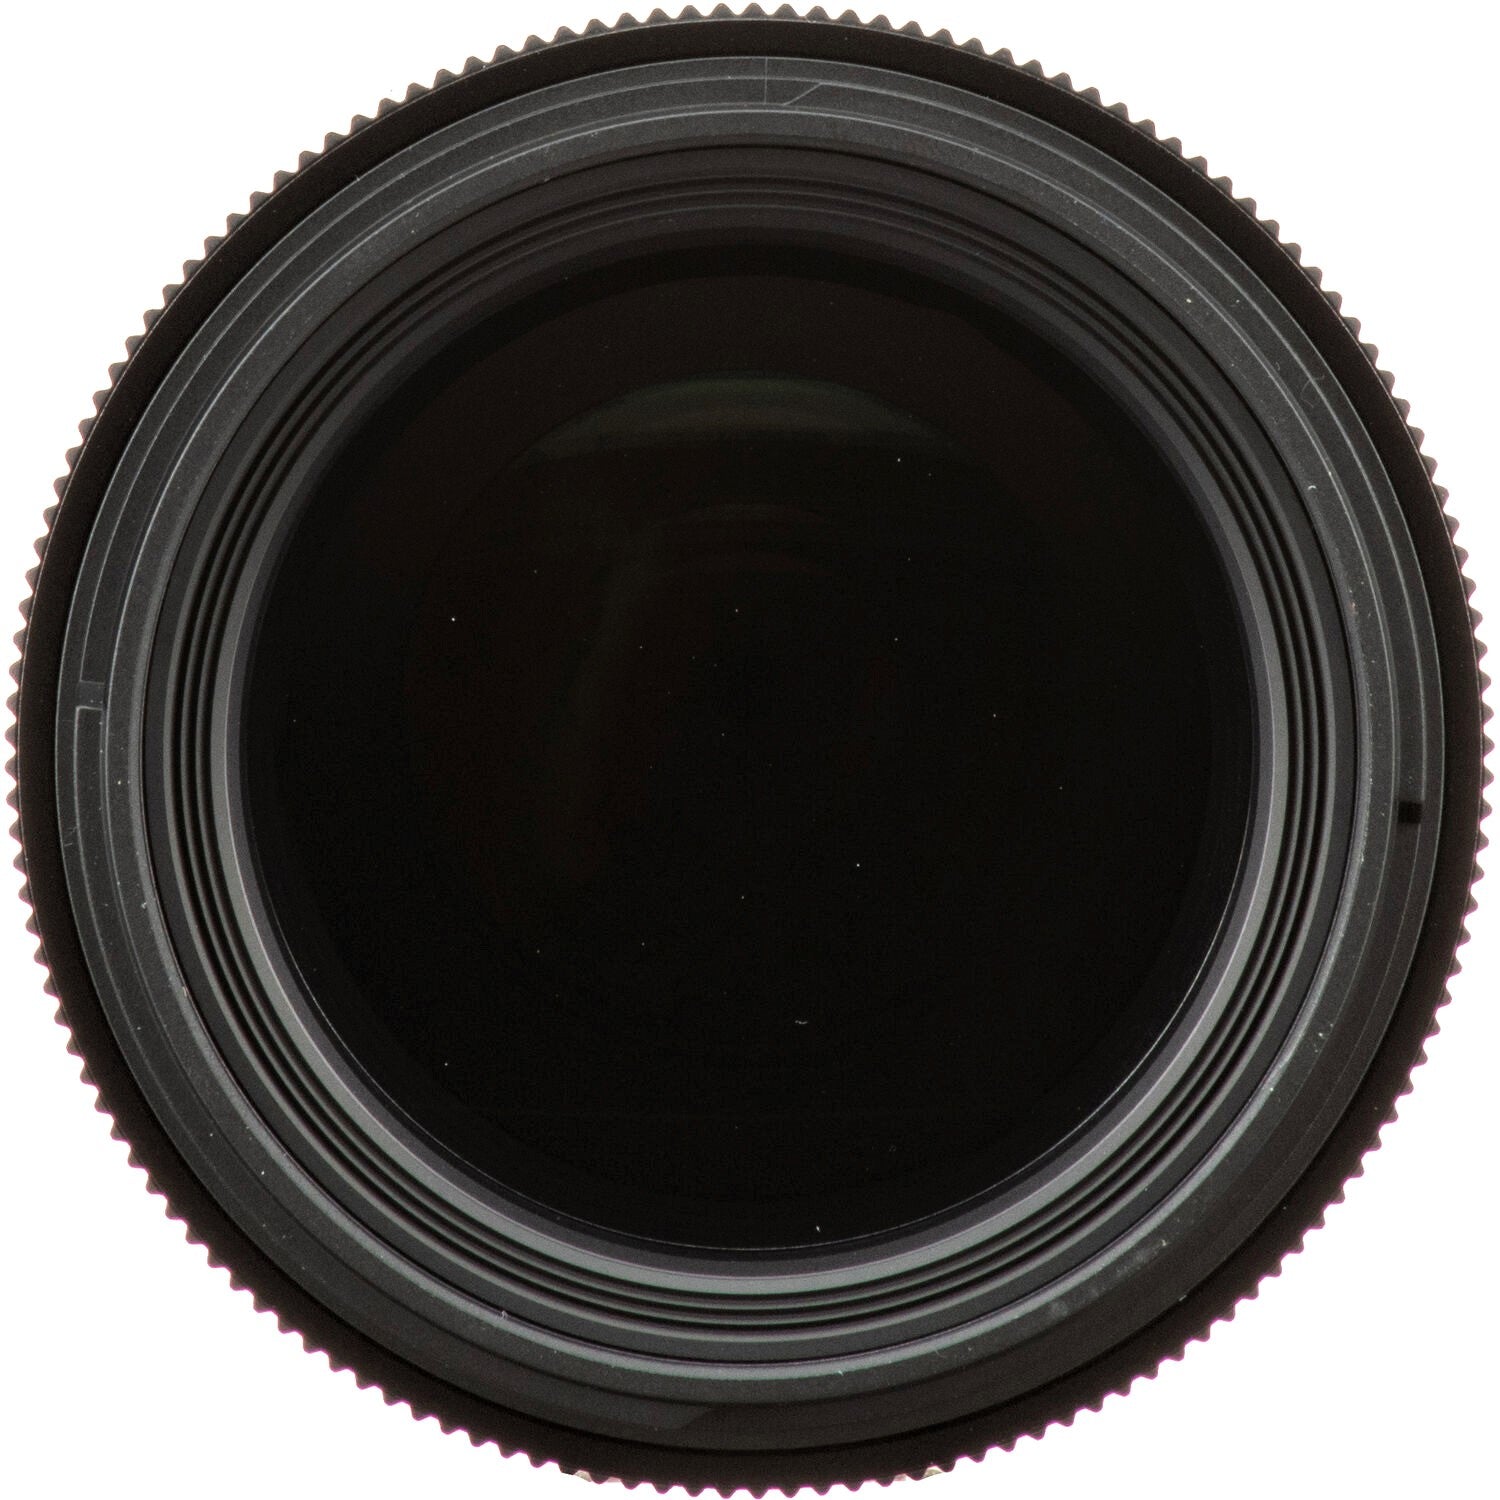 Sigma 105mm F2.8 DG DN Macro Art Lens for Leica L in a Front Close-Up View